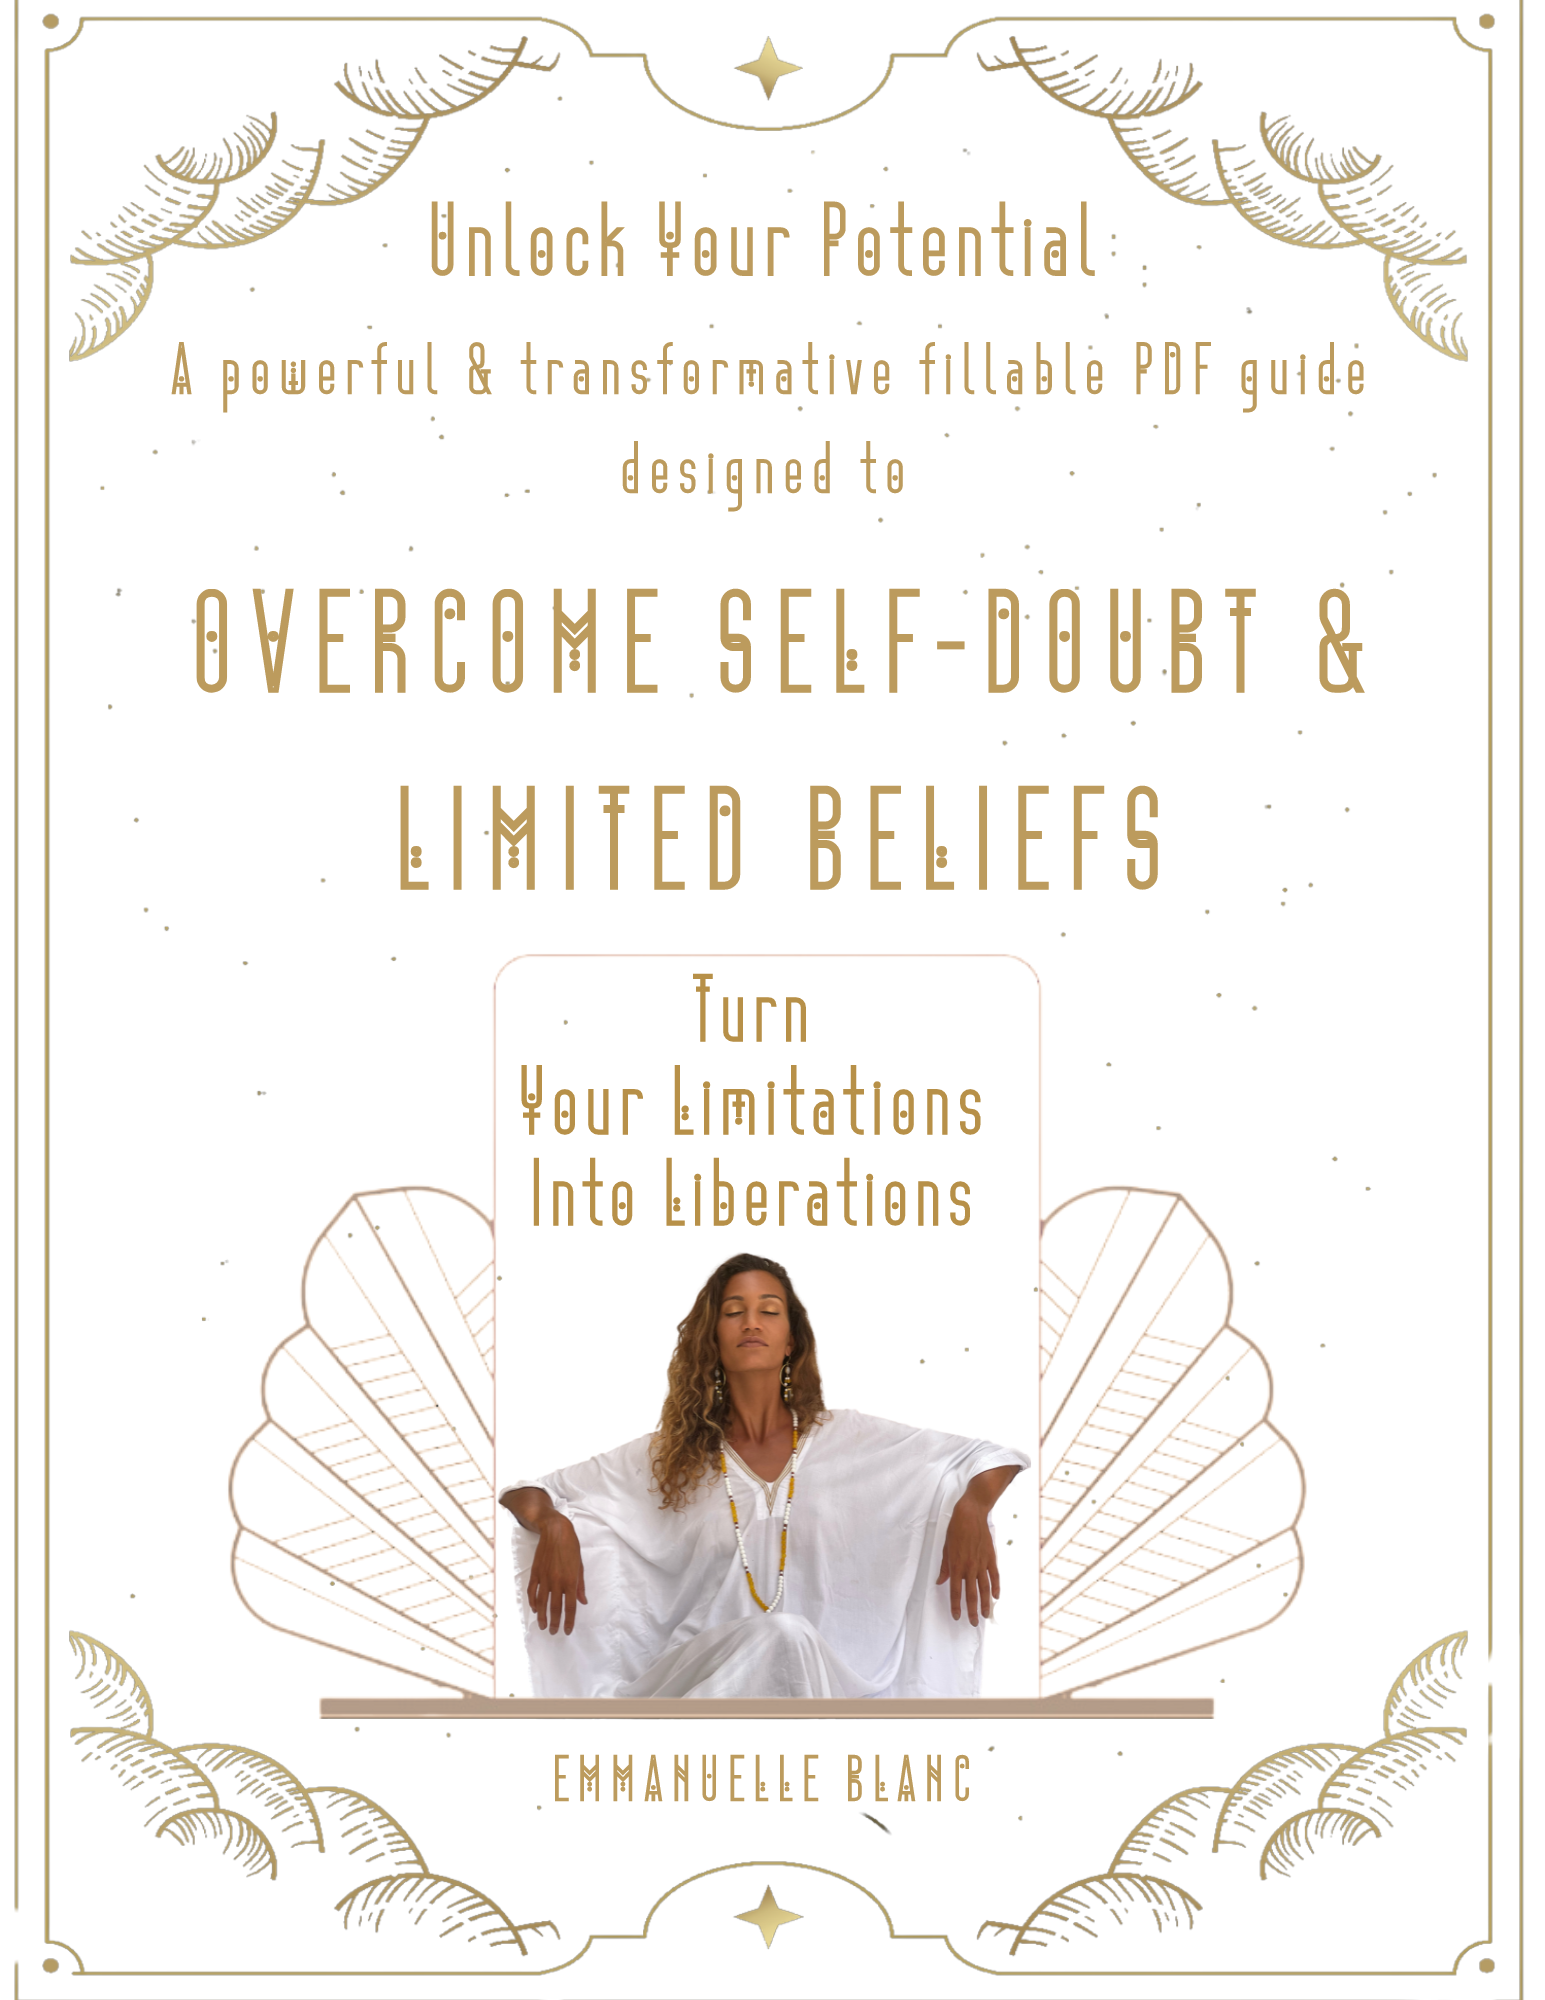 overcome self-doubt and limited beliefs - unlock your potential - a powerful &amp; transformative fillable pdf guide designed to turn your limitations into liberation by emmanuelle blanc unleash your inner wealth